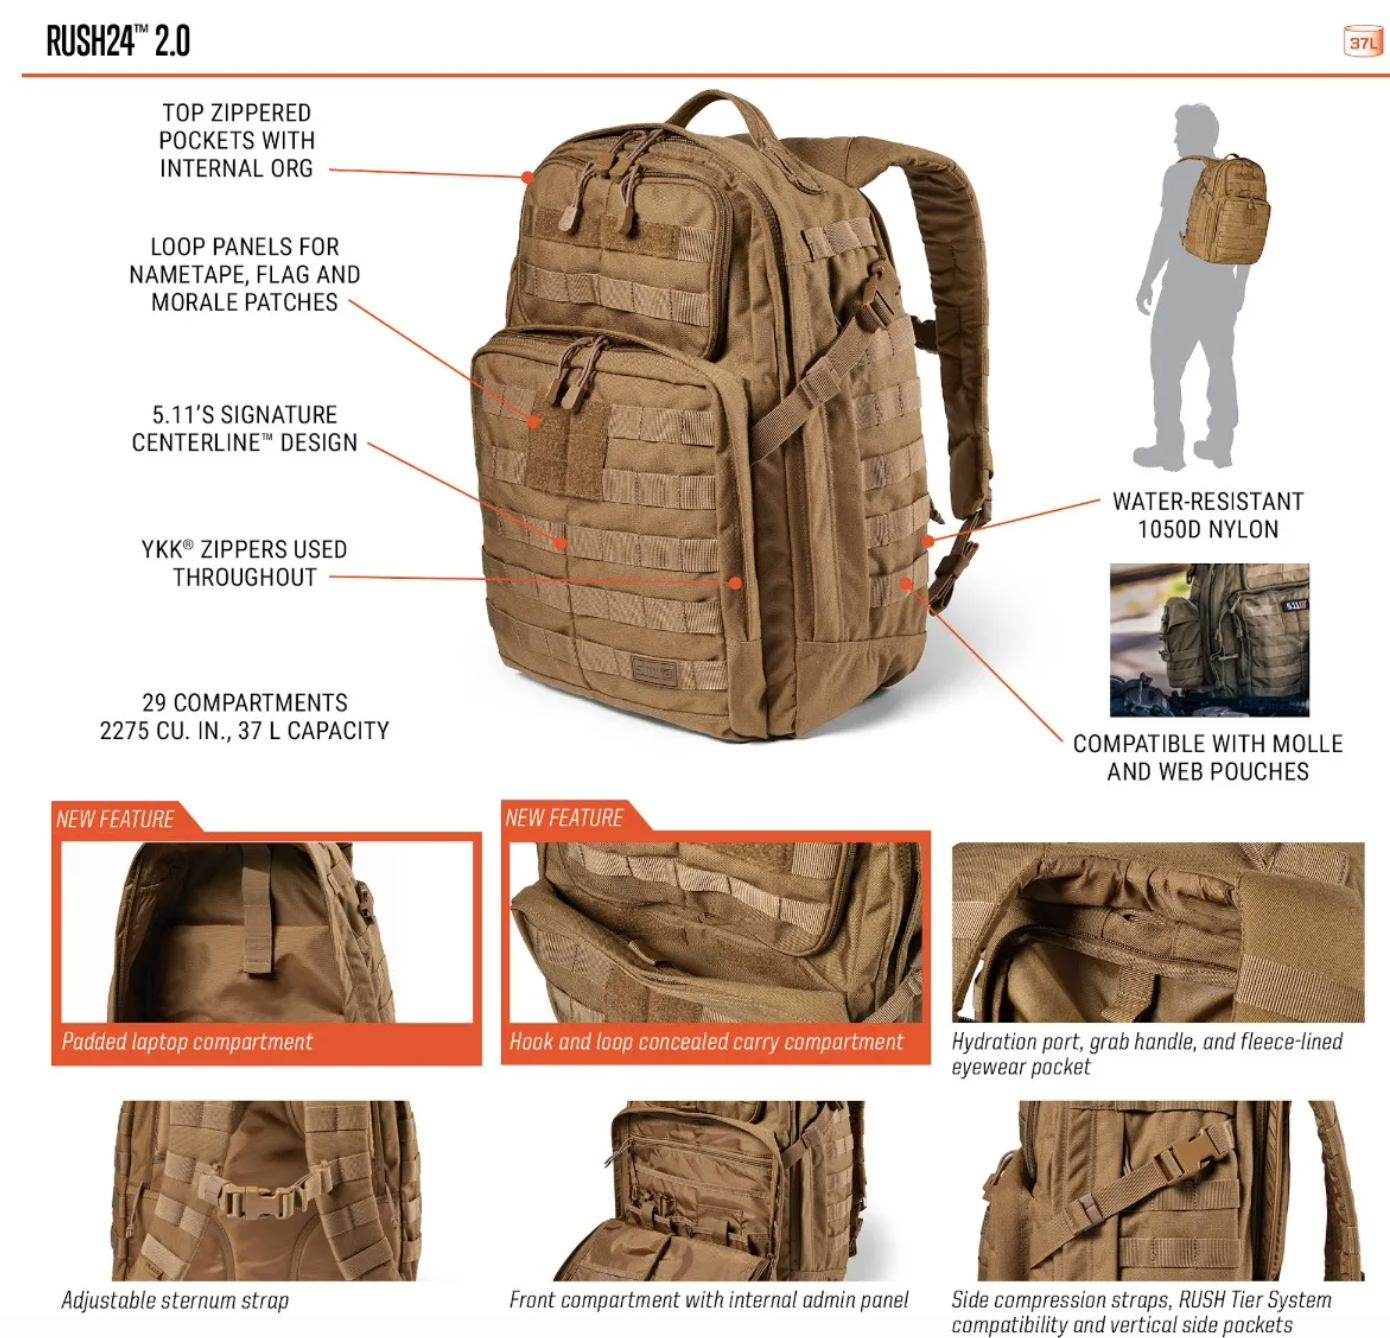 5.11 - Rush24 2.0 - Backpack 37L - Double Tap (026)